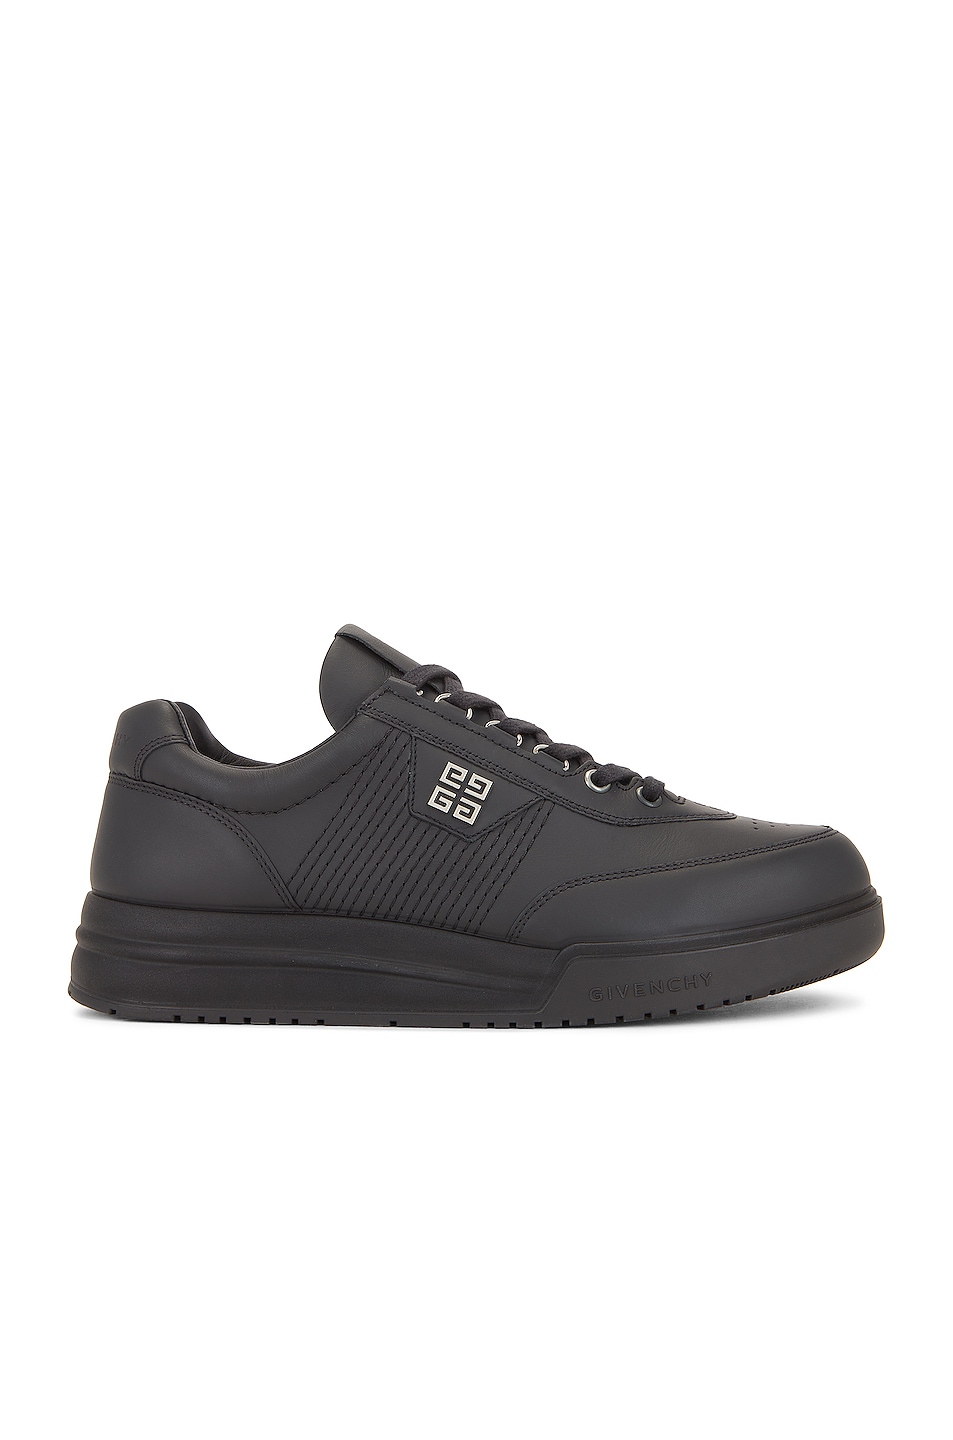 Image 1 of Givenchy G4 Low Top Sneaker in Black